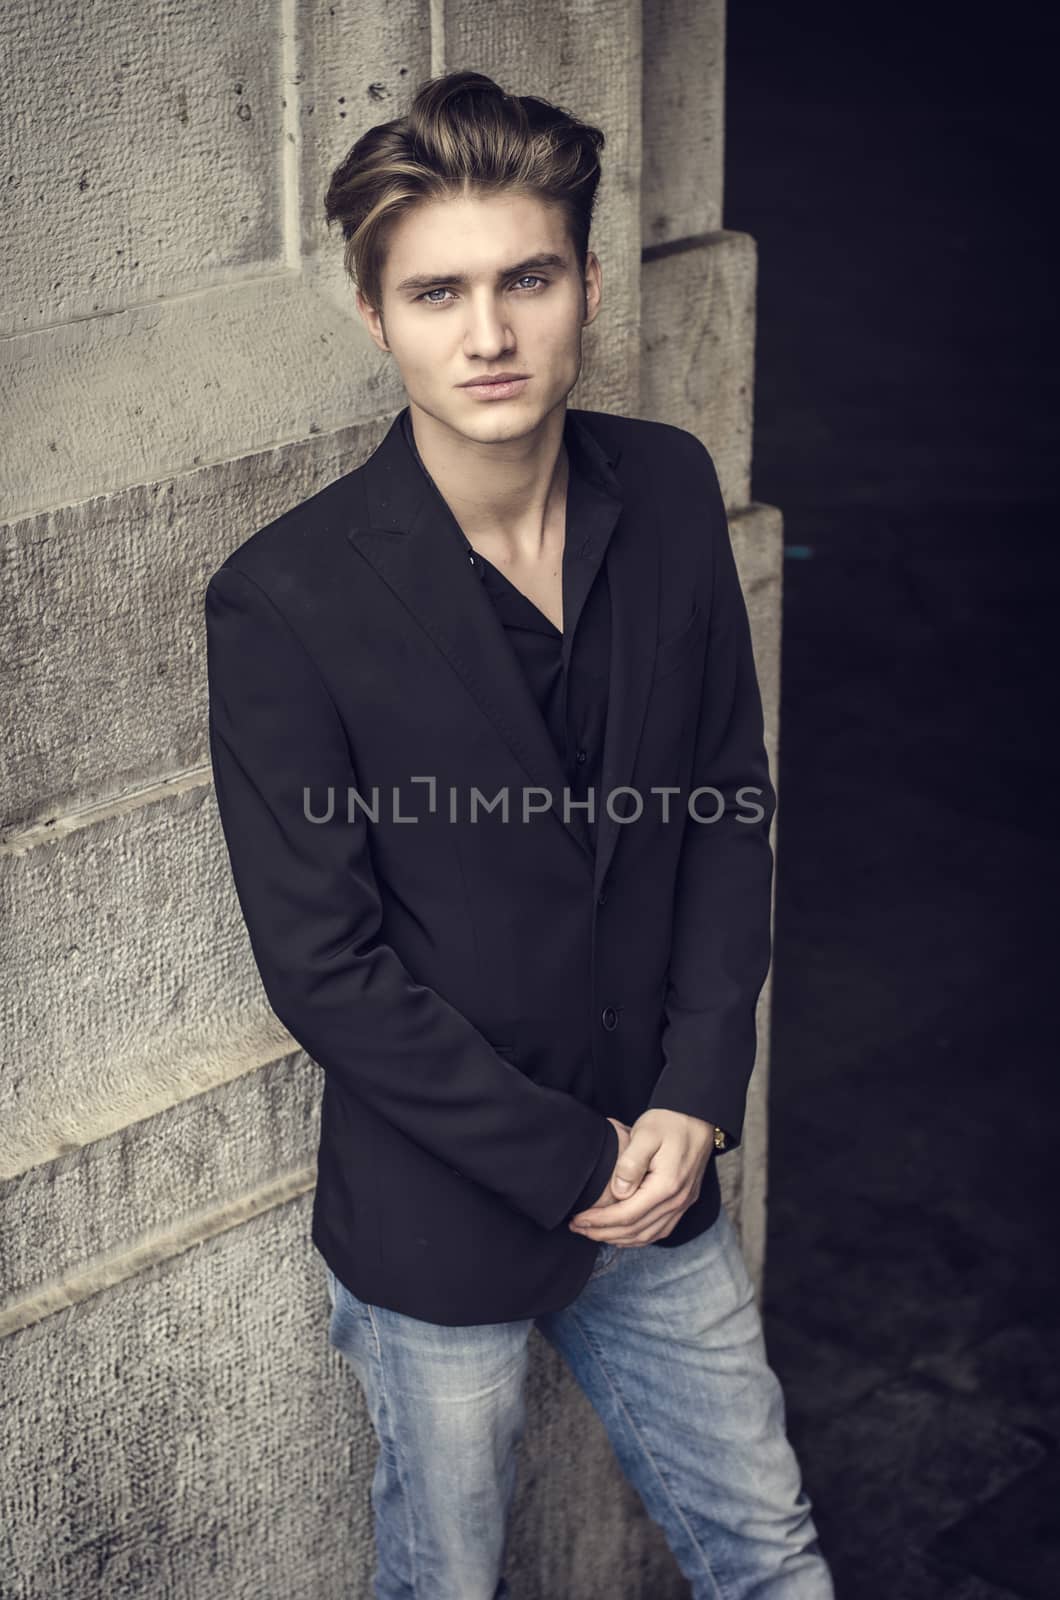 Attractive blue eyed, blond young man leaning against white wall by artofphoto